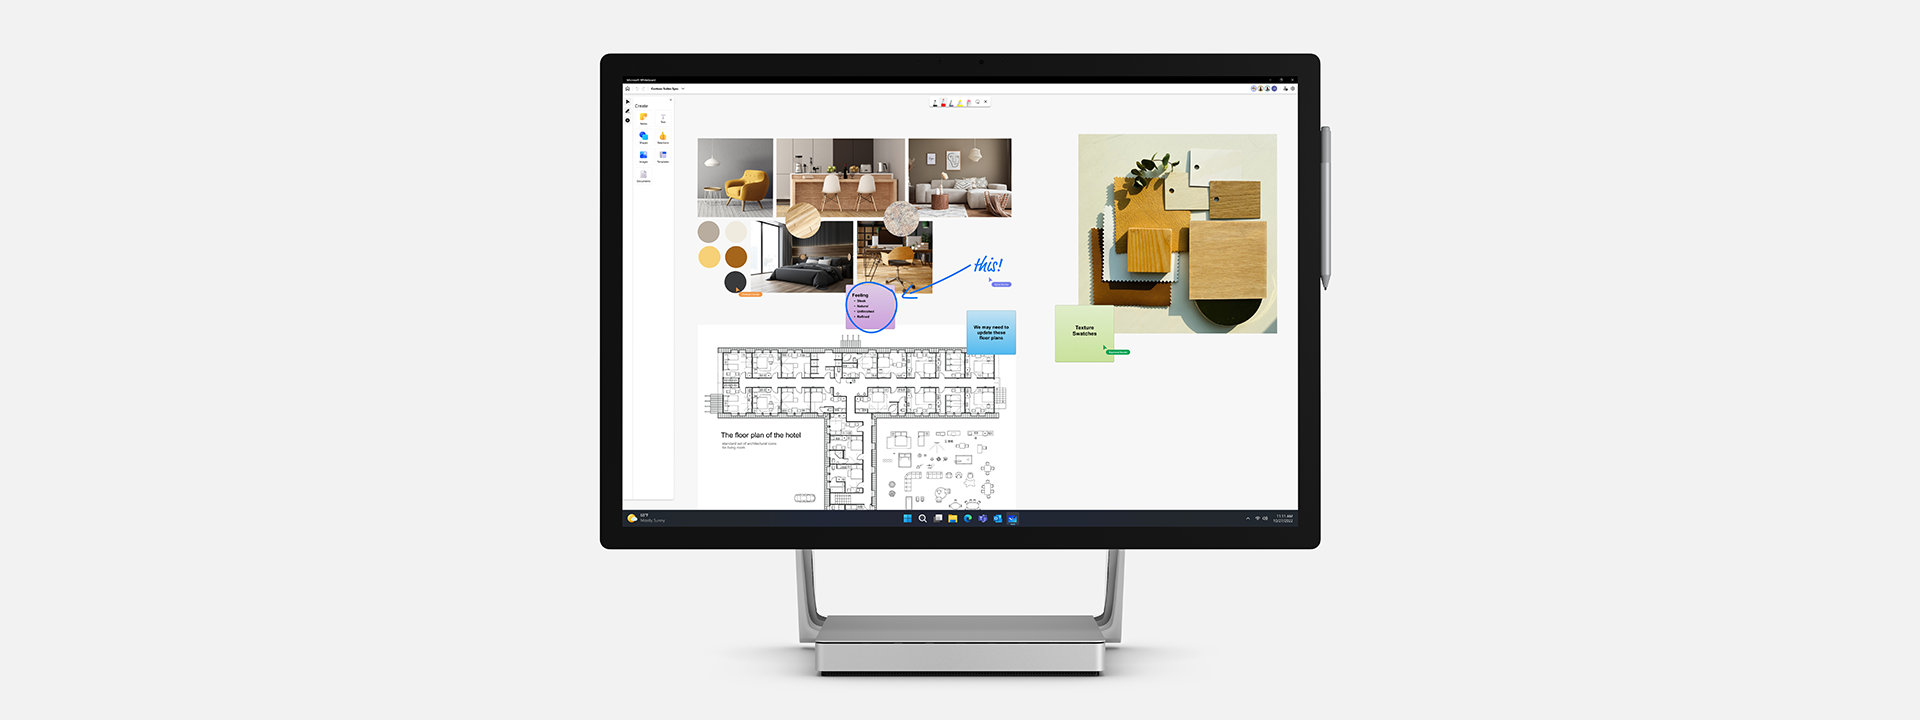 Surface Studio 2+ for Business with Microsoft Whiteboard in Teams on the screen.